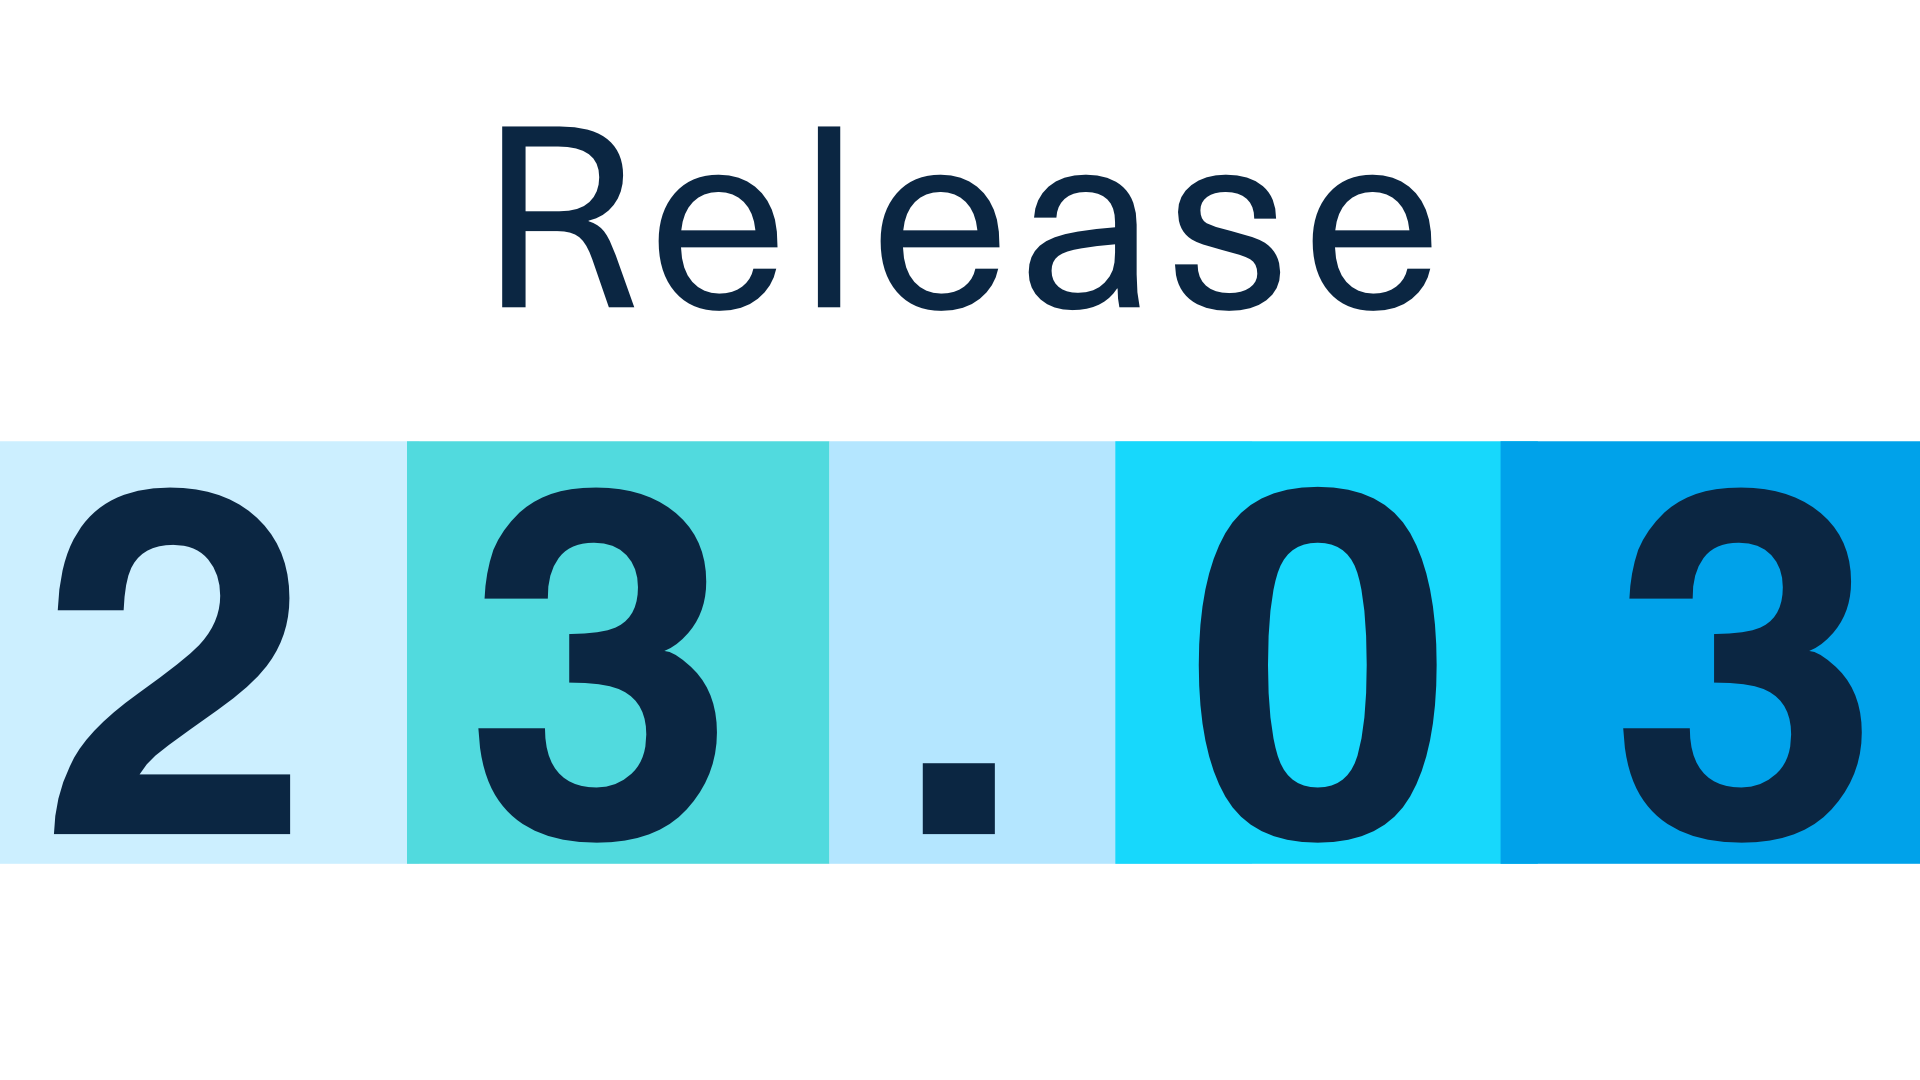 Release 23.03